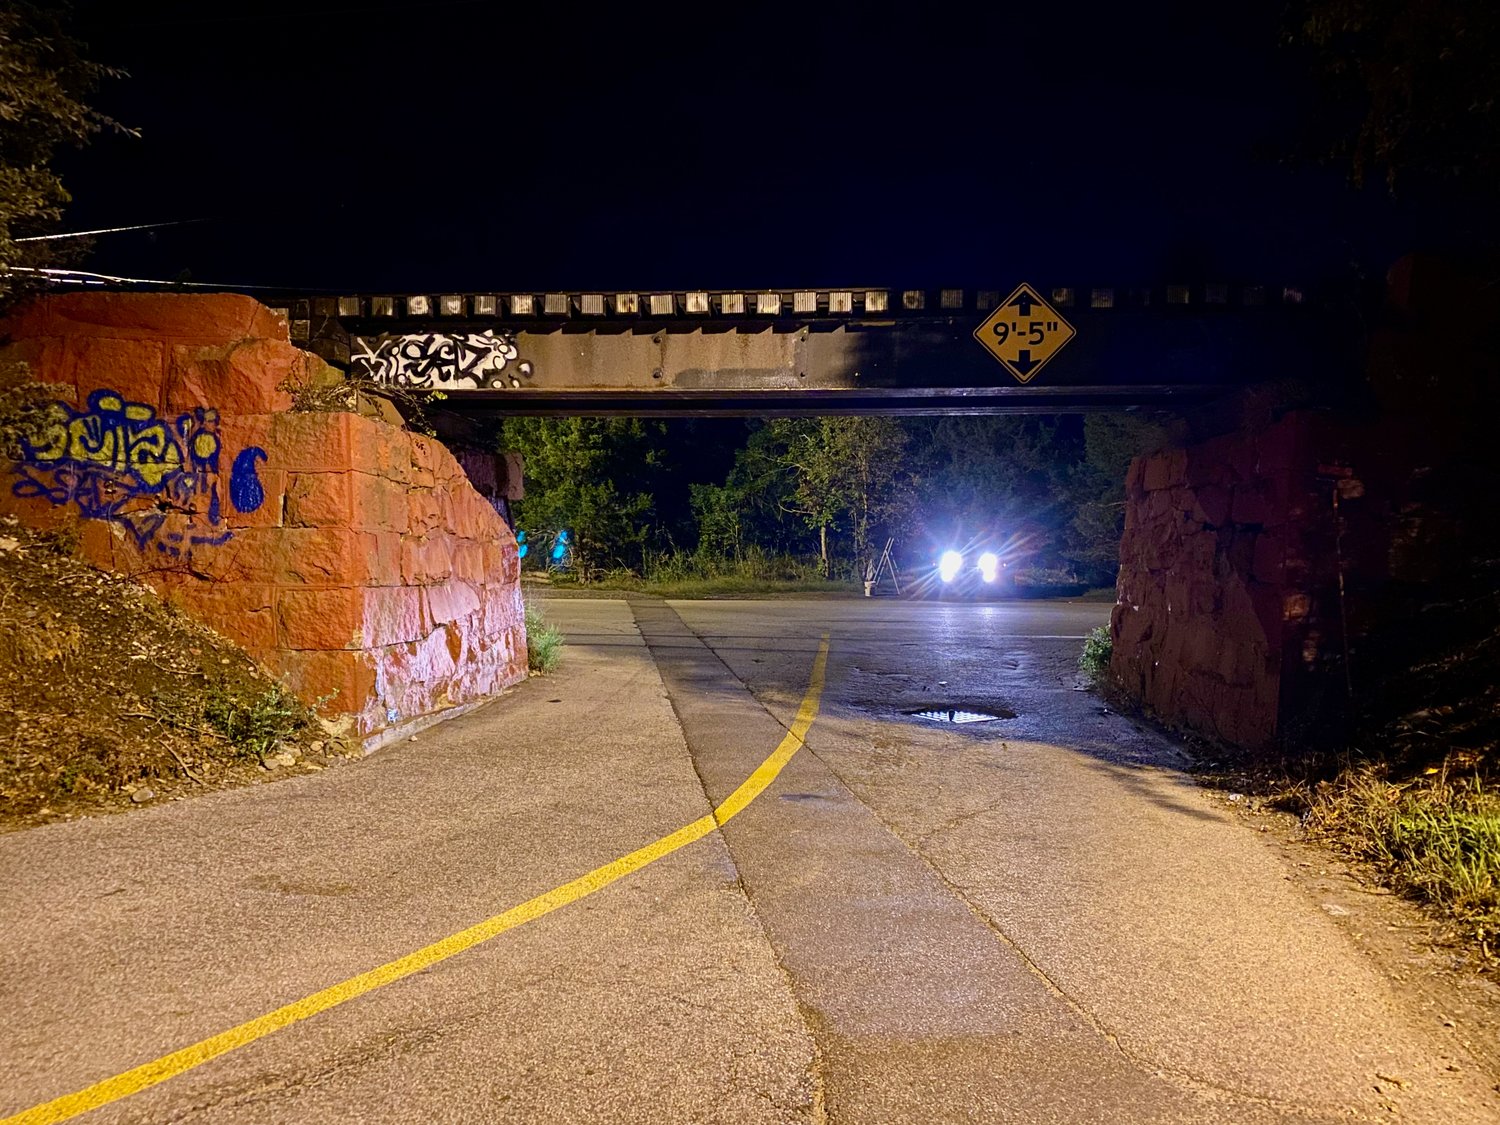 This photo, which Karyn Jimenez-Elliott snapped shortly after 5 a.m. Sunday, shows the graffiti on the railroad bridge at the entrance to Common Fence Point.